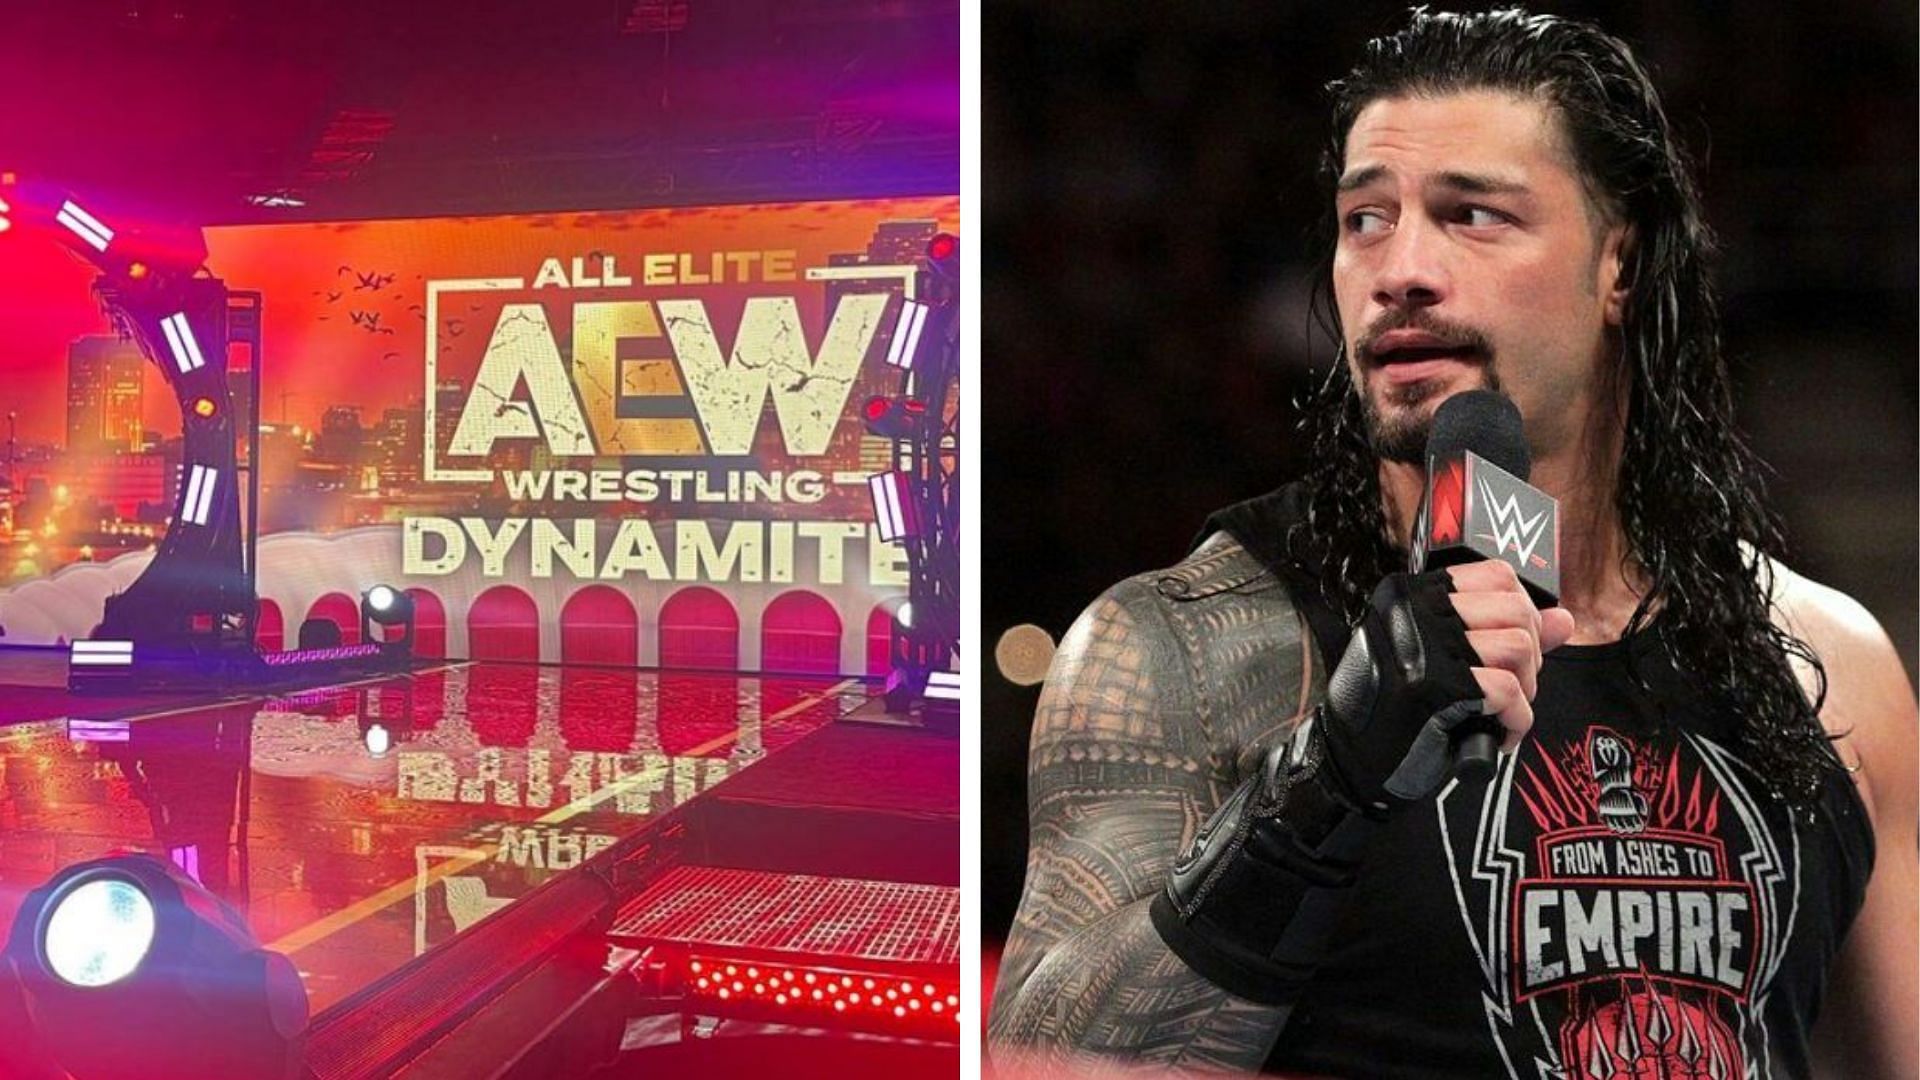 Roman Reigns has improved a lot on the mic